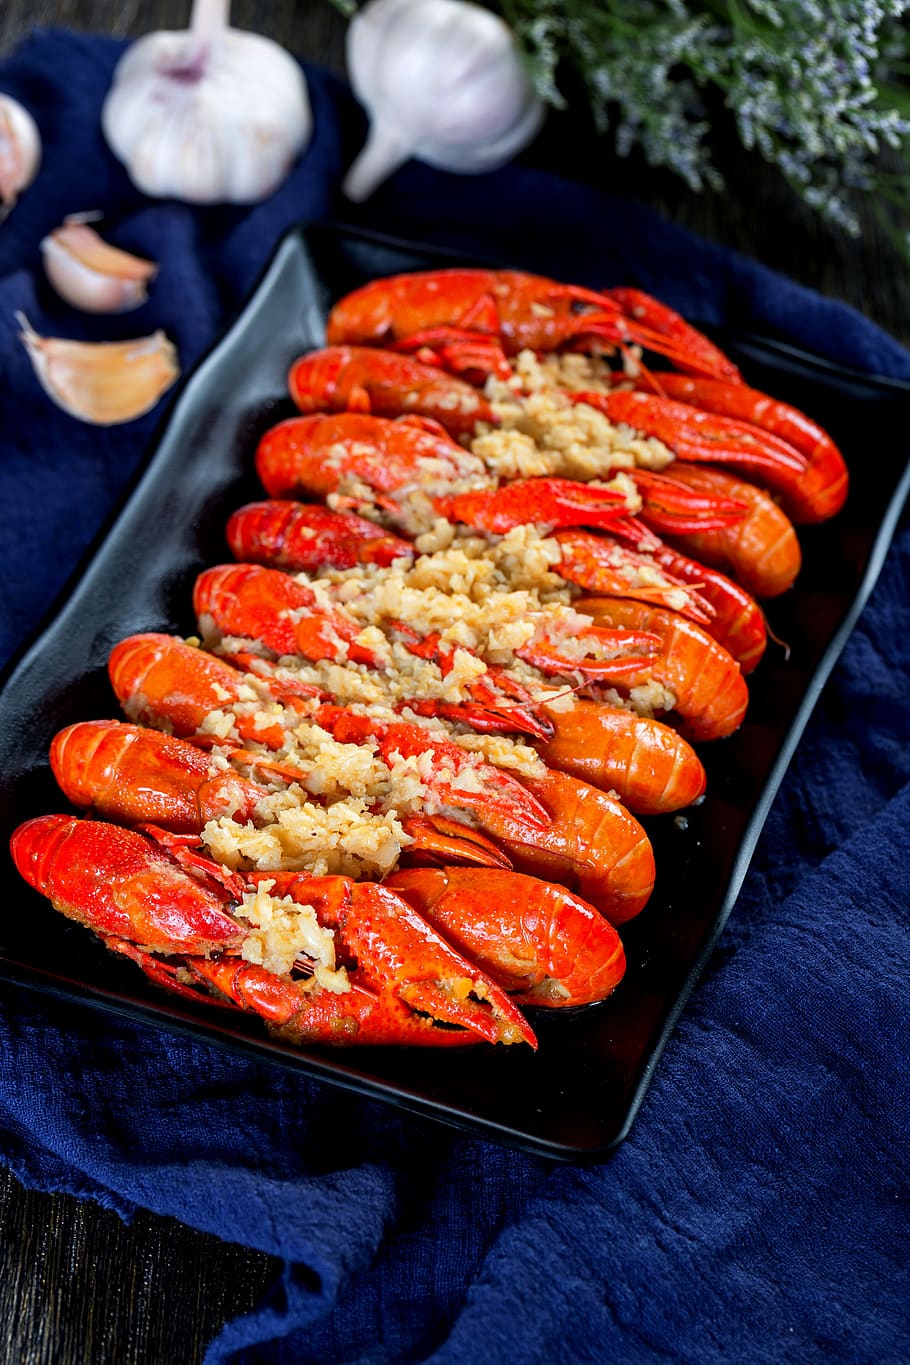 crayfish, shrimp inspector gadget, food and drink, food, freshness, healthy eating, seafood, meat, wellbeing, red